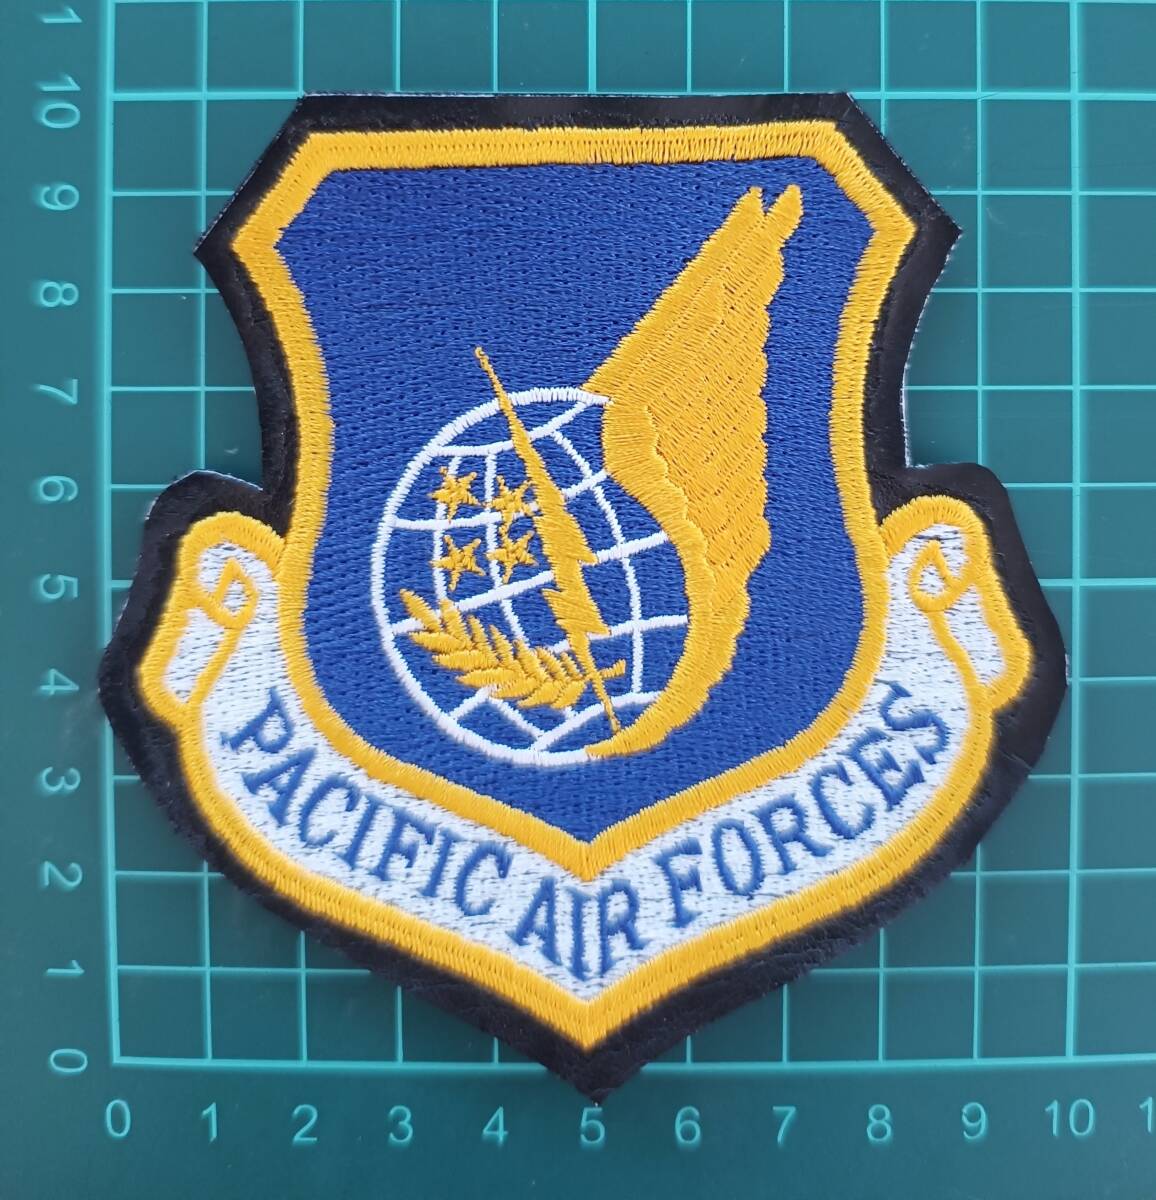 **USAF* America ВВС *PACIFIC AIR FORCES* commando *Command* patch *PATCH*100mm X 100mm**